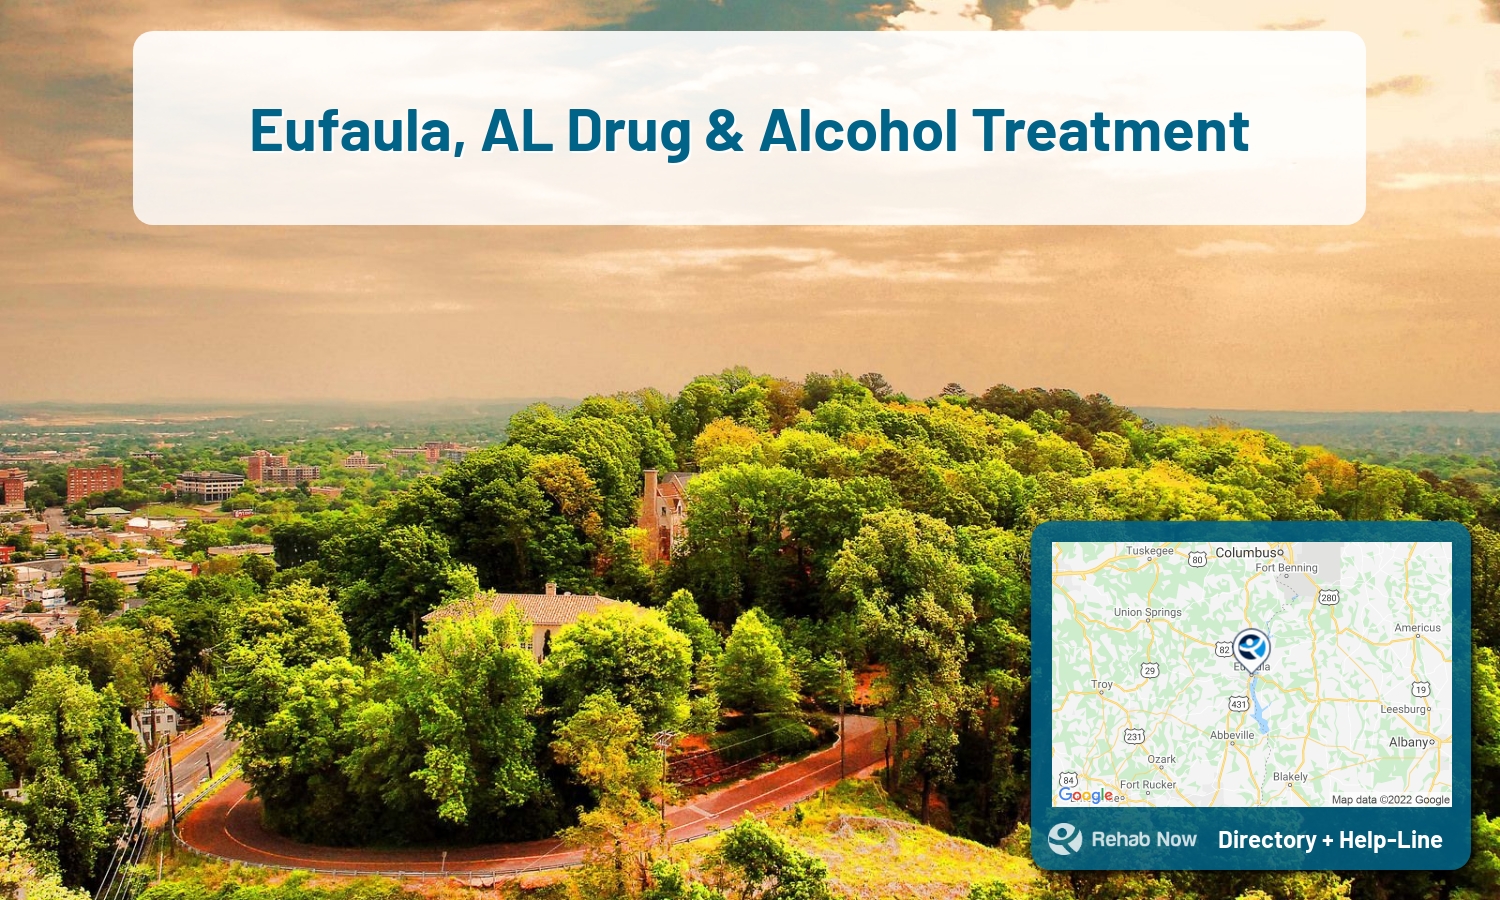 Let our expert counselors help find the best addiction treatment in Eufaula, Alabama now with a free call to our hotline.